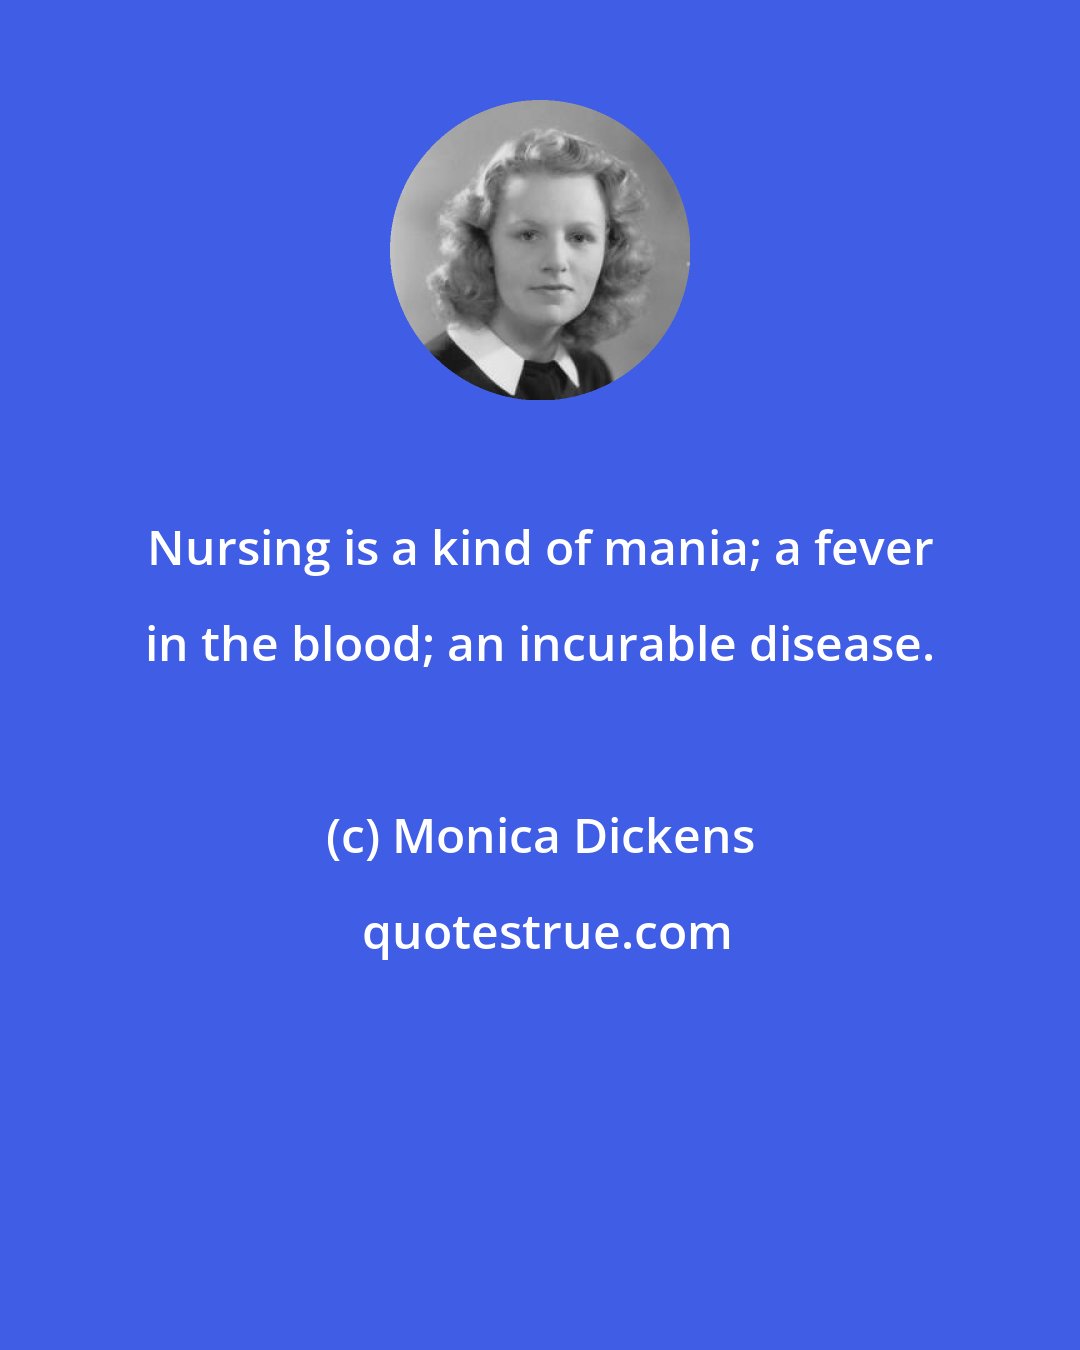 Monica Dickens: Nursing is a kind of mania; a fever in the blood; an incurable disease.